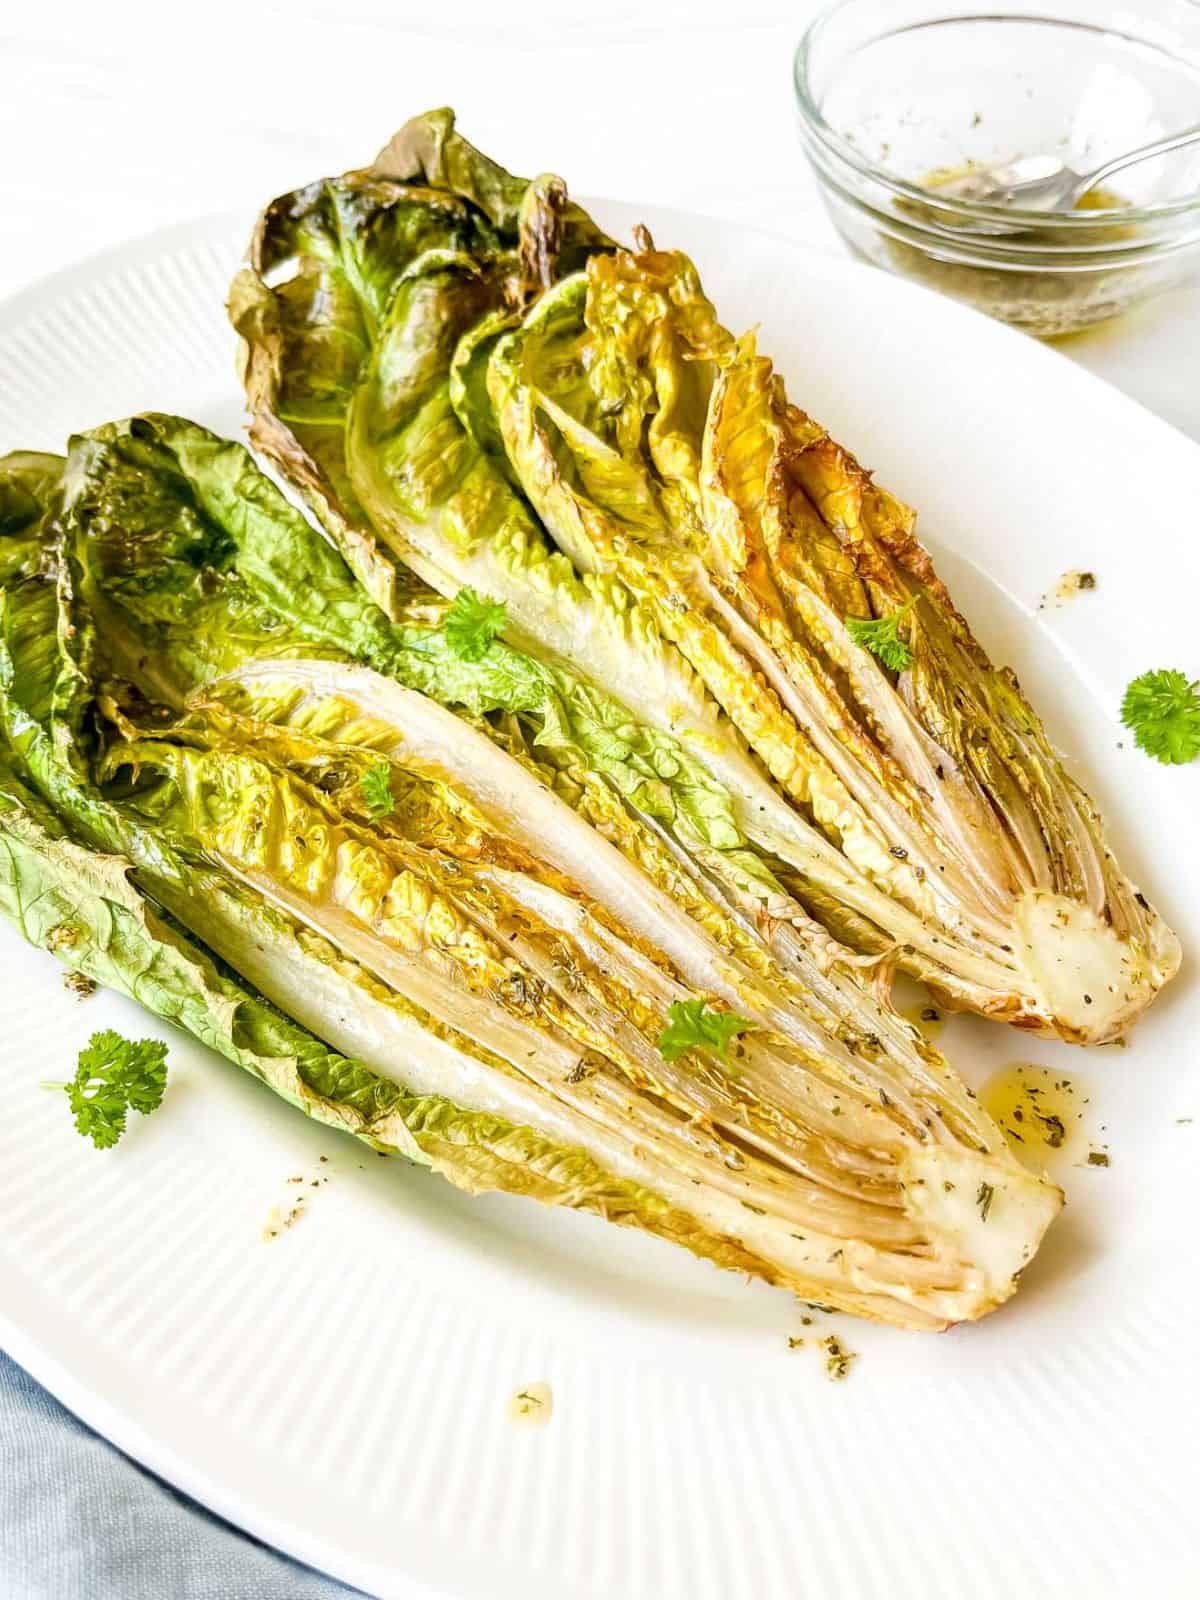 two halves of romaine lettuce on a white plate with a glass bowl of oil dressing in the background.